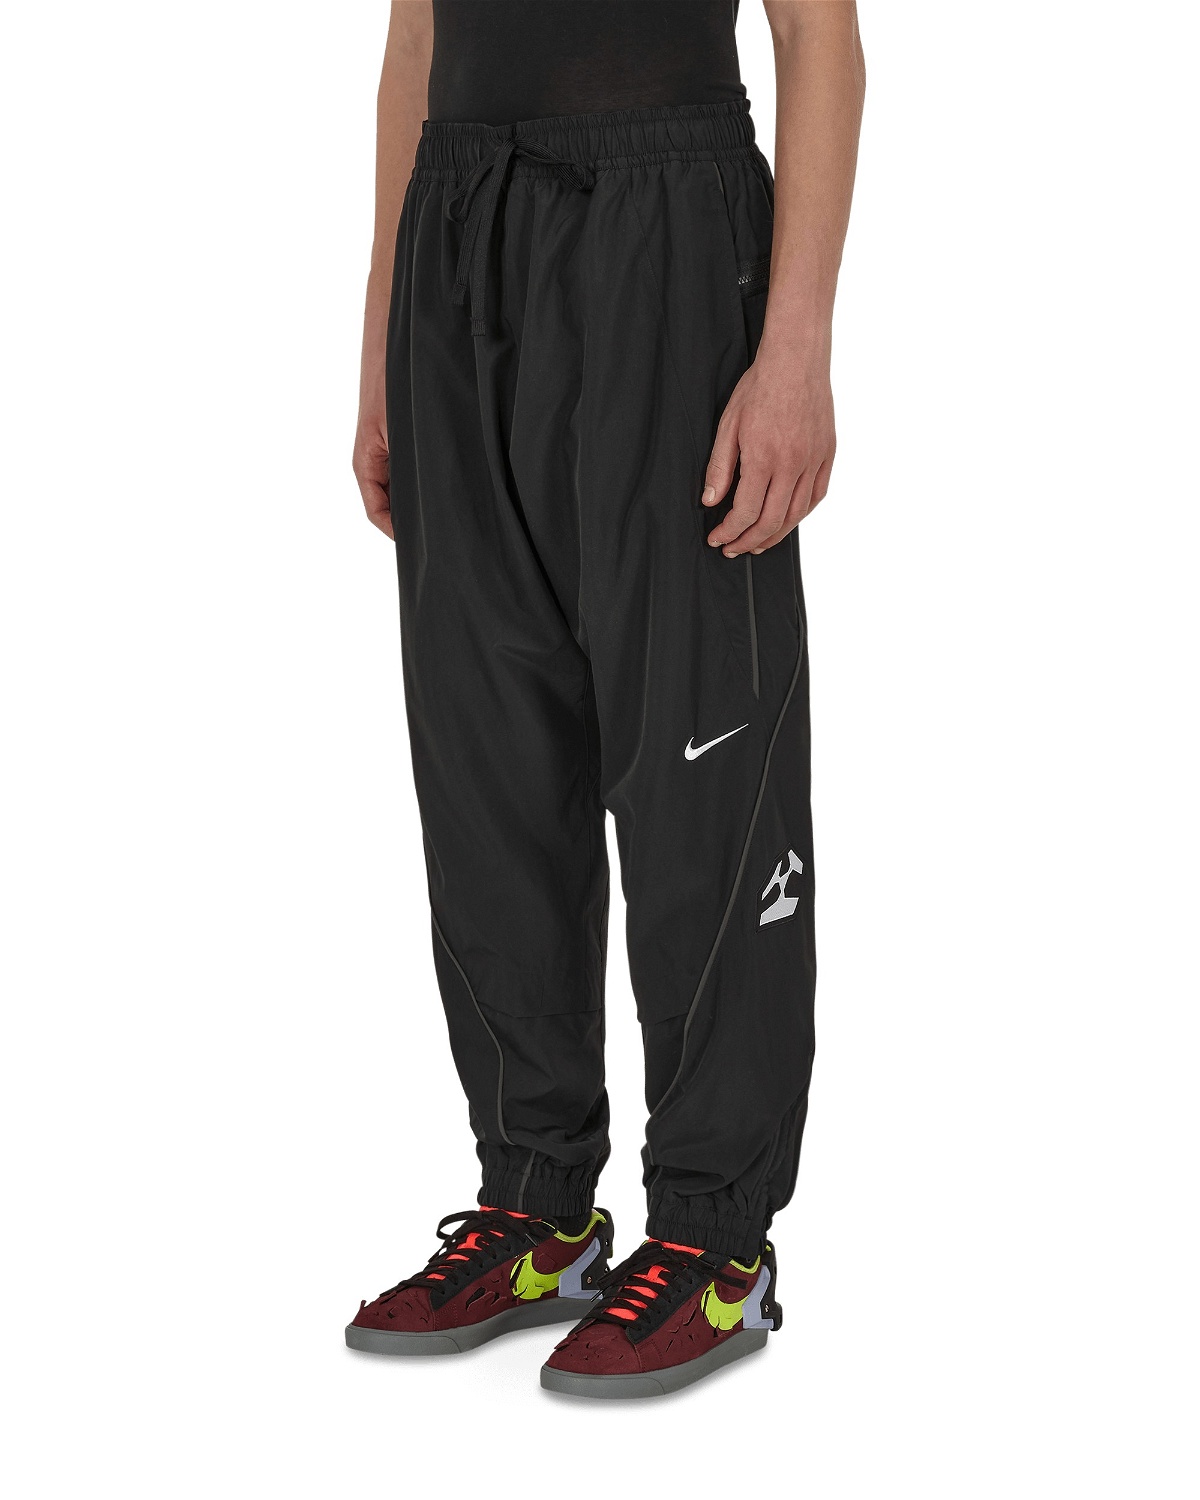 Acronym® Woven Pants Nike Special Project